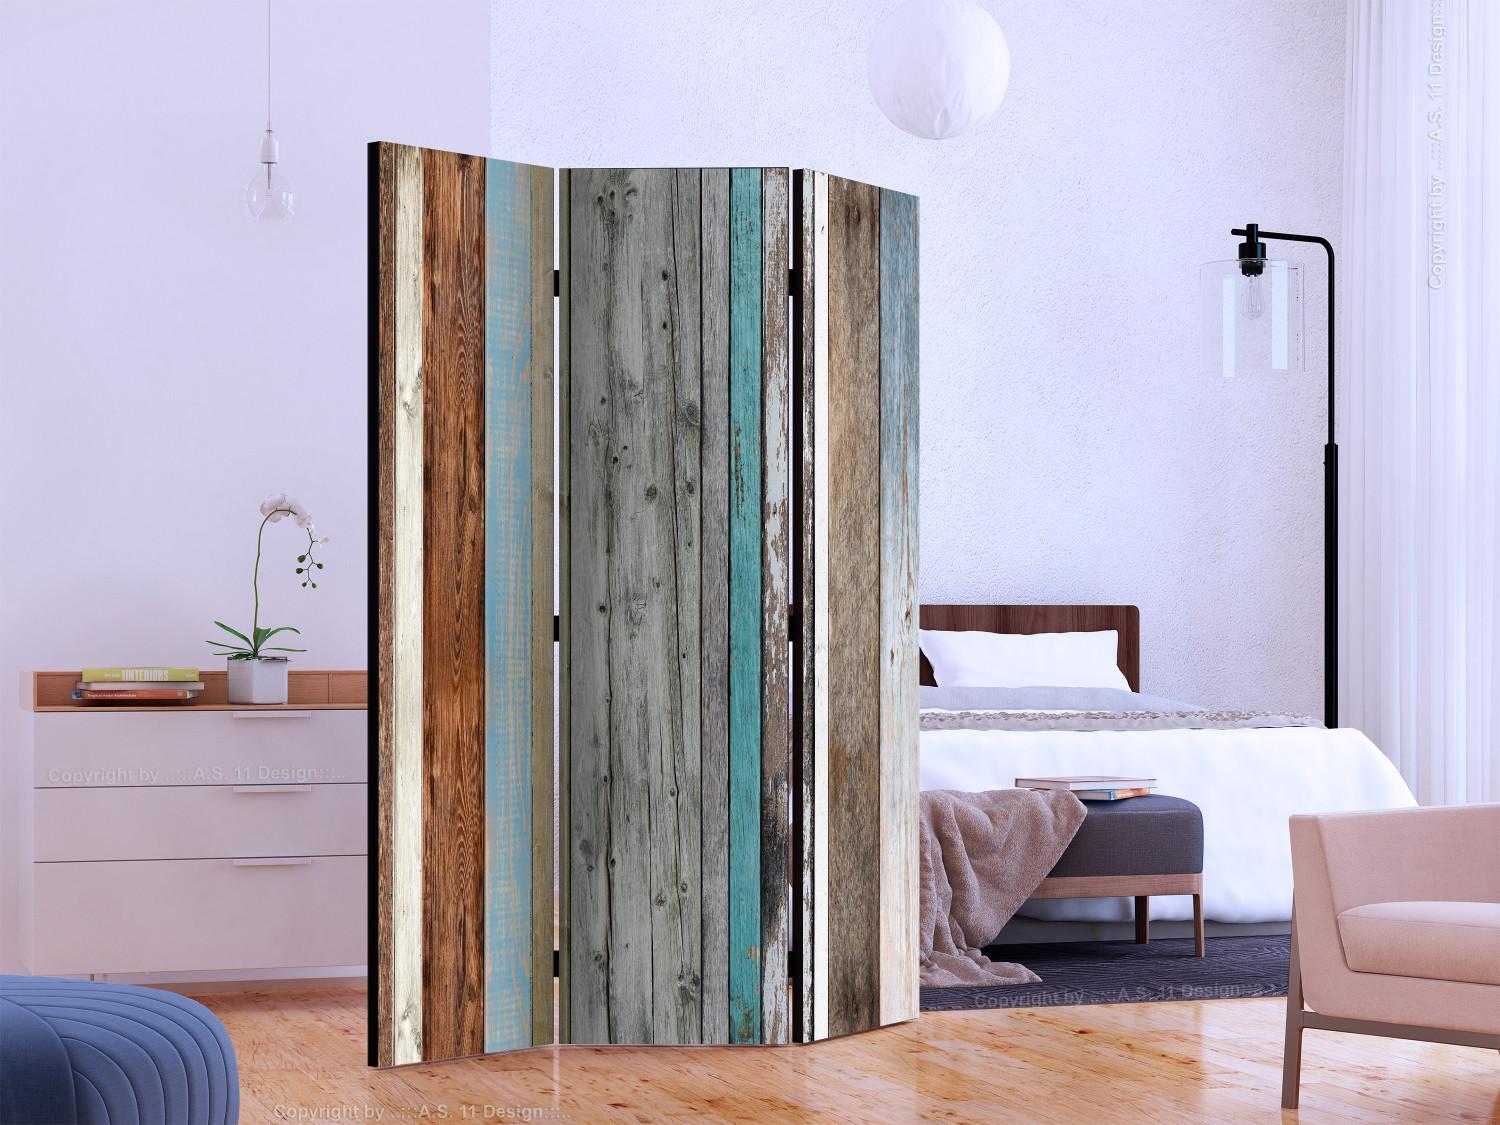 Room Divider Arranged Colors (3-piece) - composition in colorful wooden planks